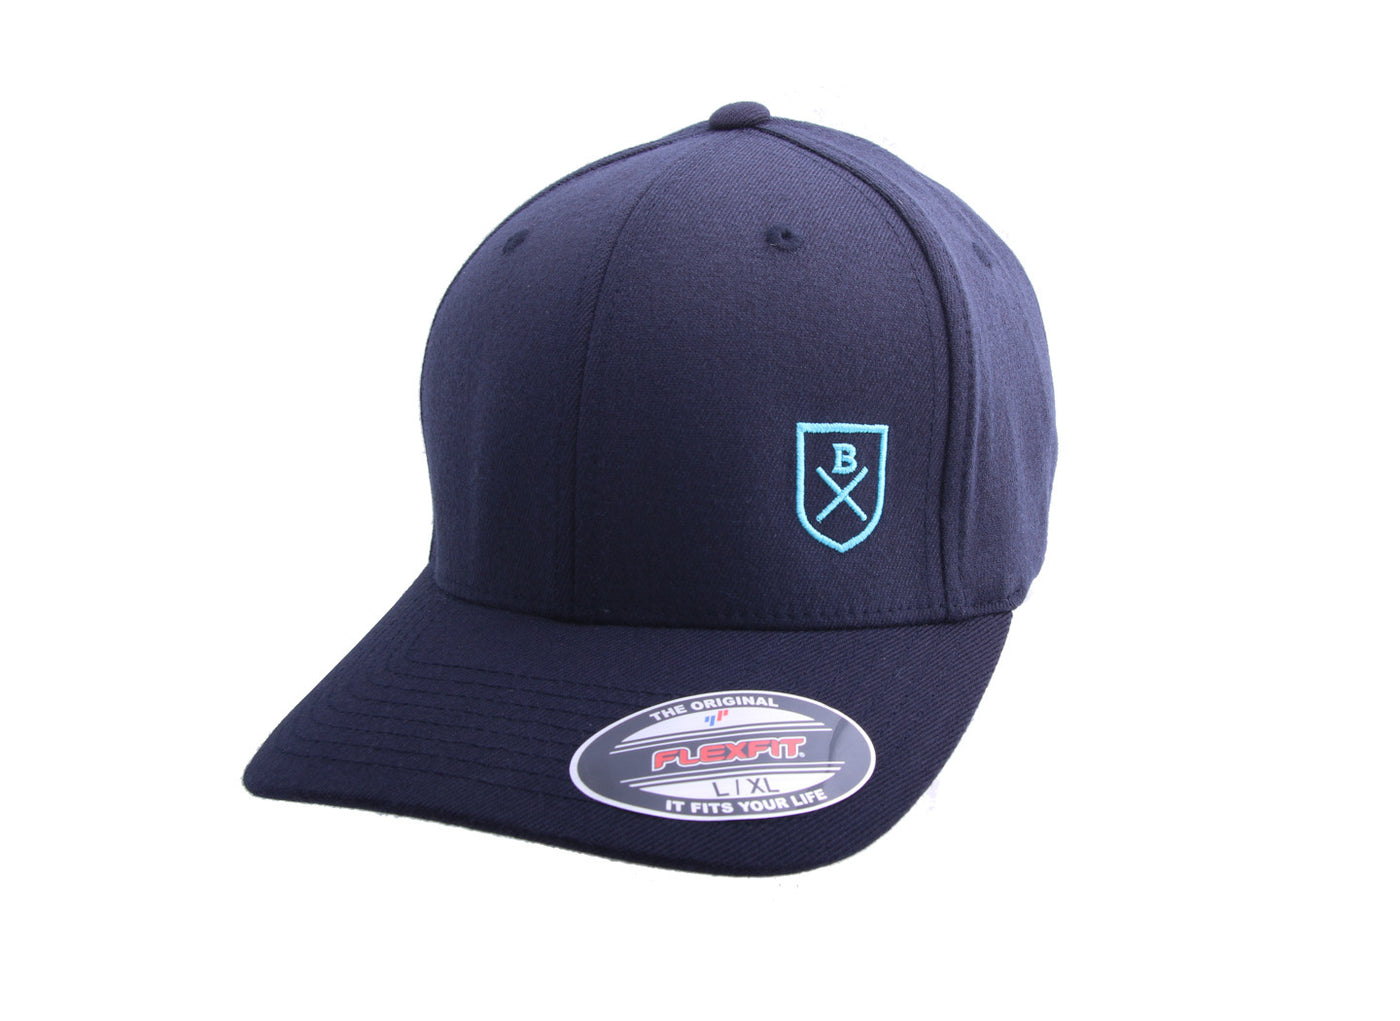  Embroidered Shield Classic Cap in Navy - The World's Finest Waterwear | BLUESMITHS